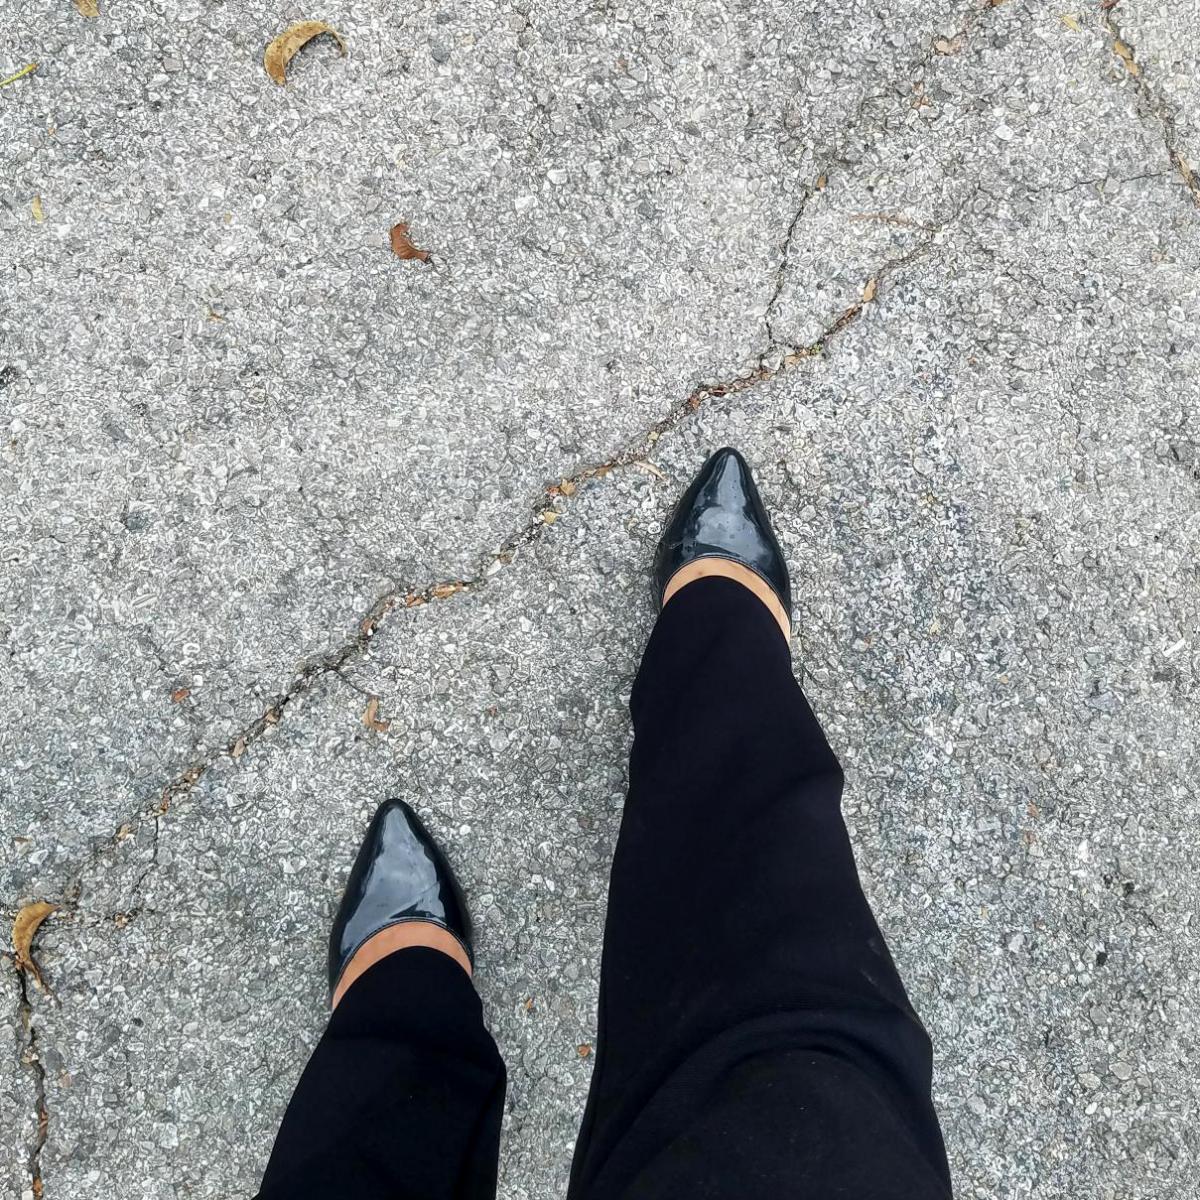 Person's feet walking on concrete wearing black pointy shoes.